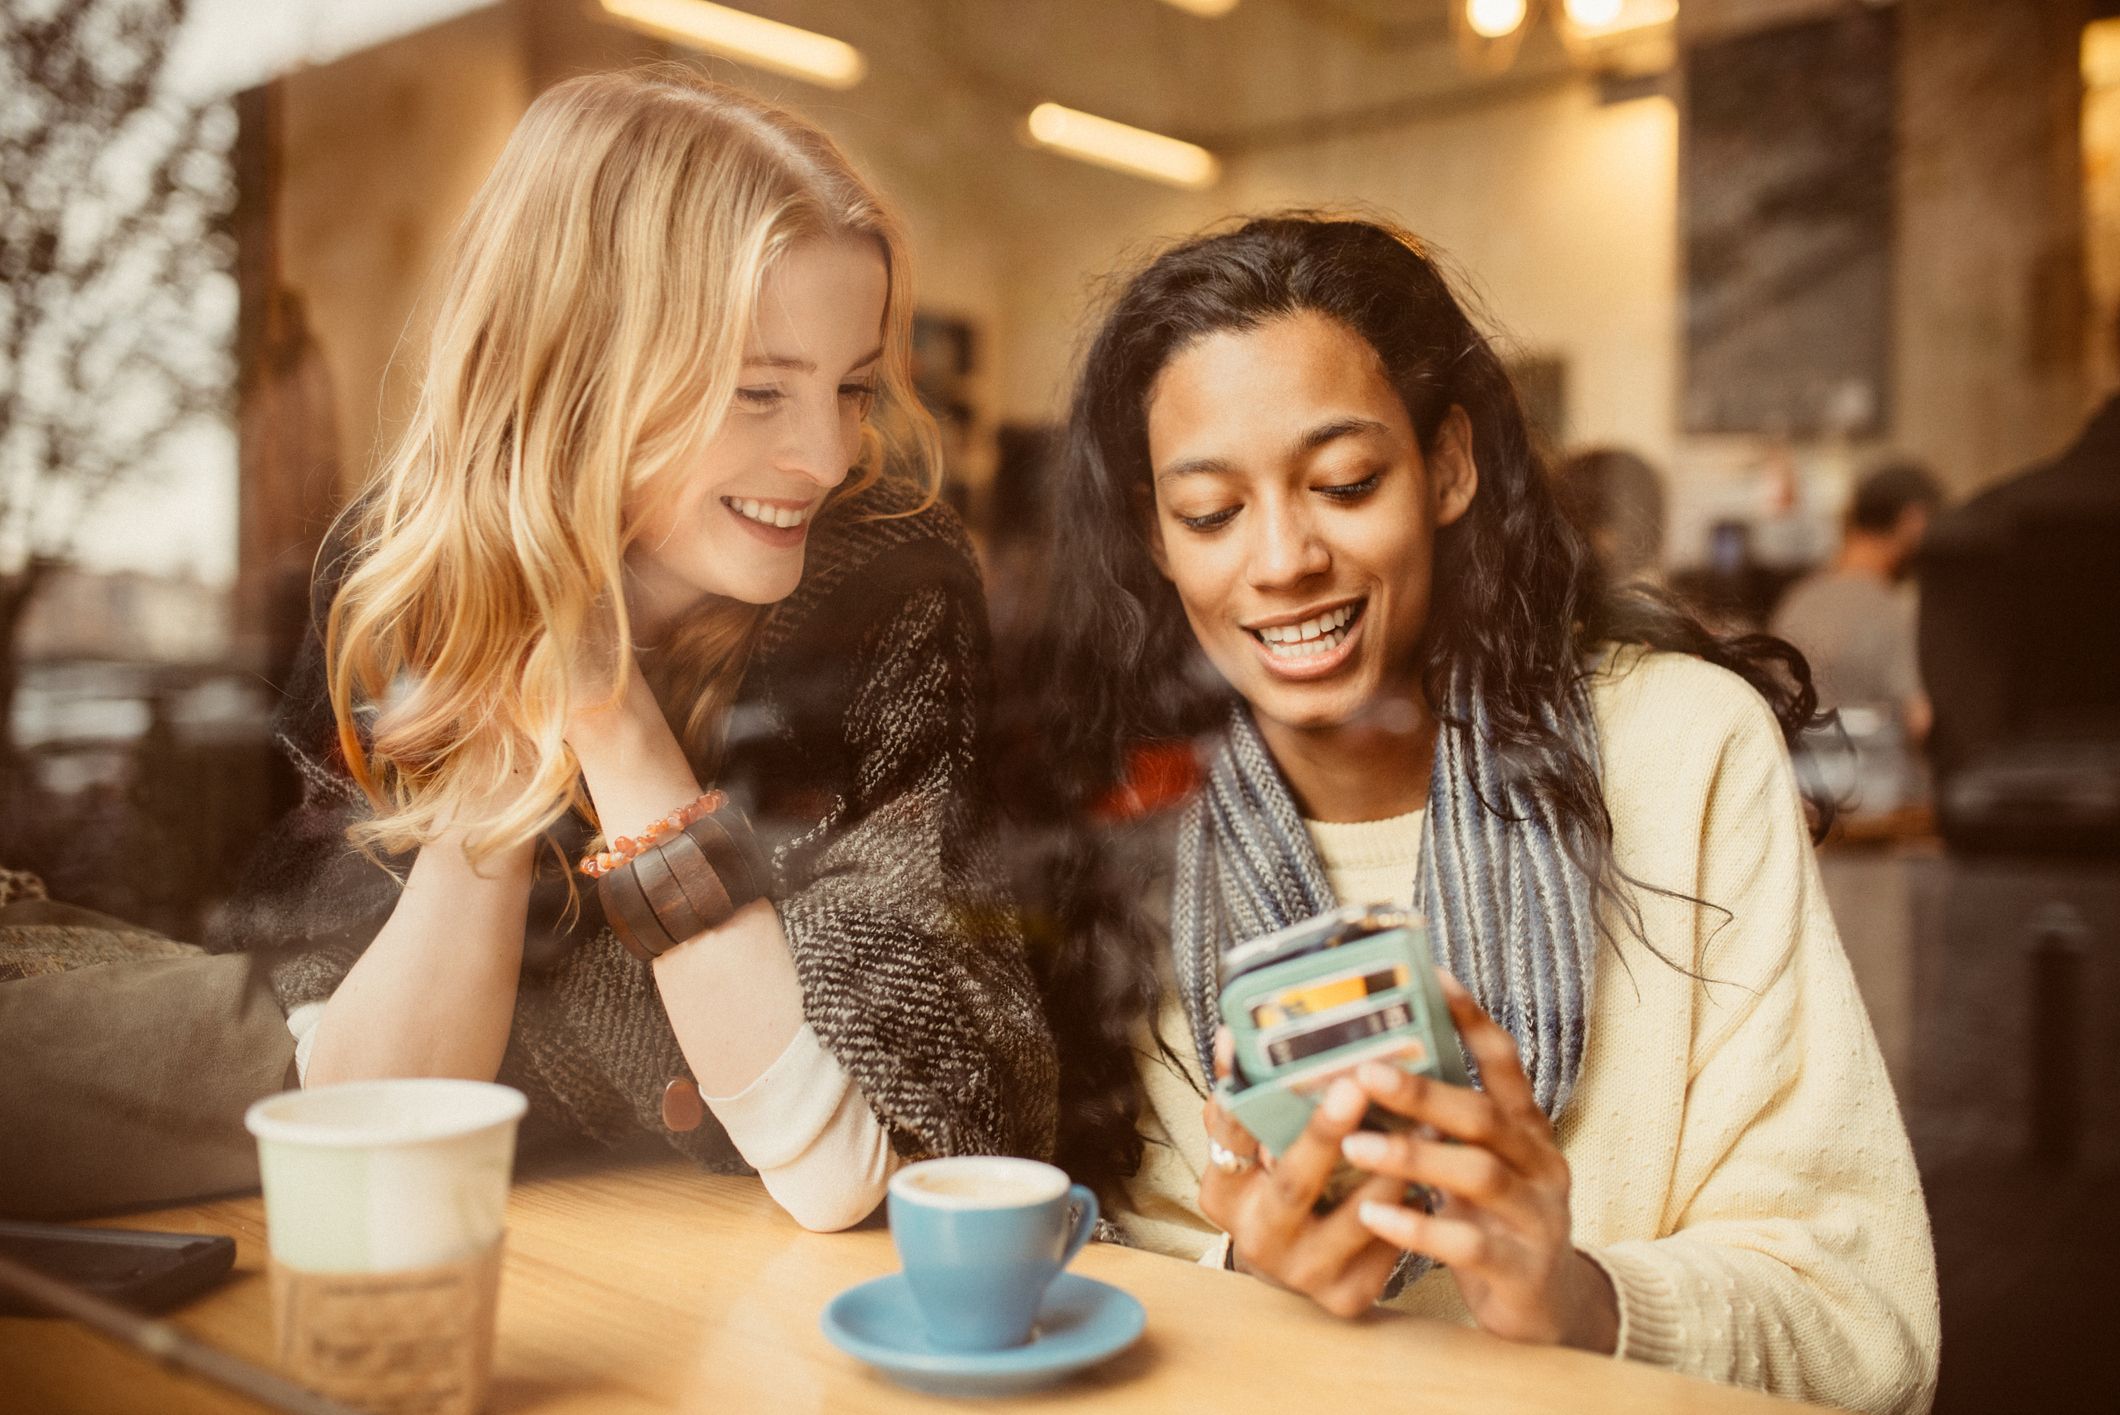 12 Best Friendship Apps to Meet New and Make Friends